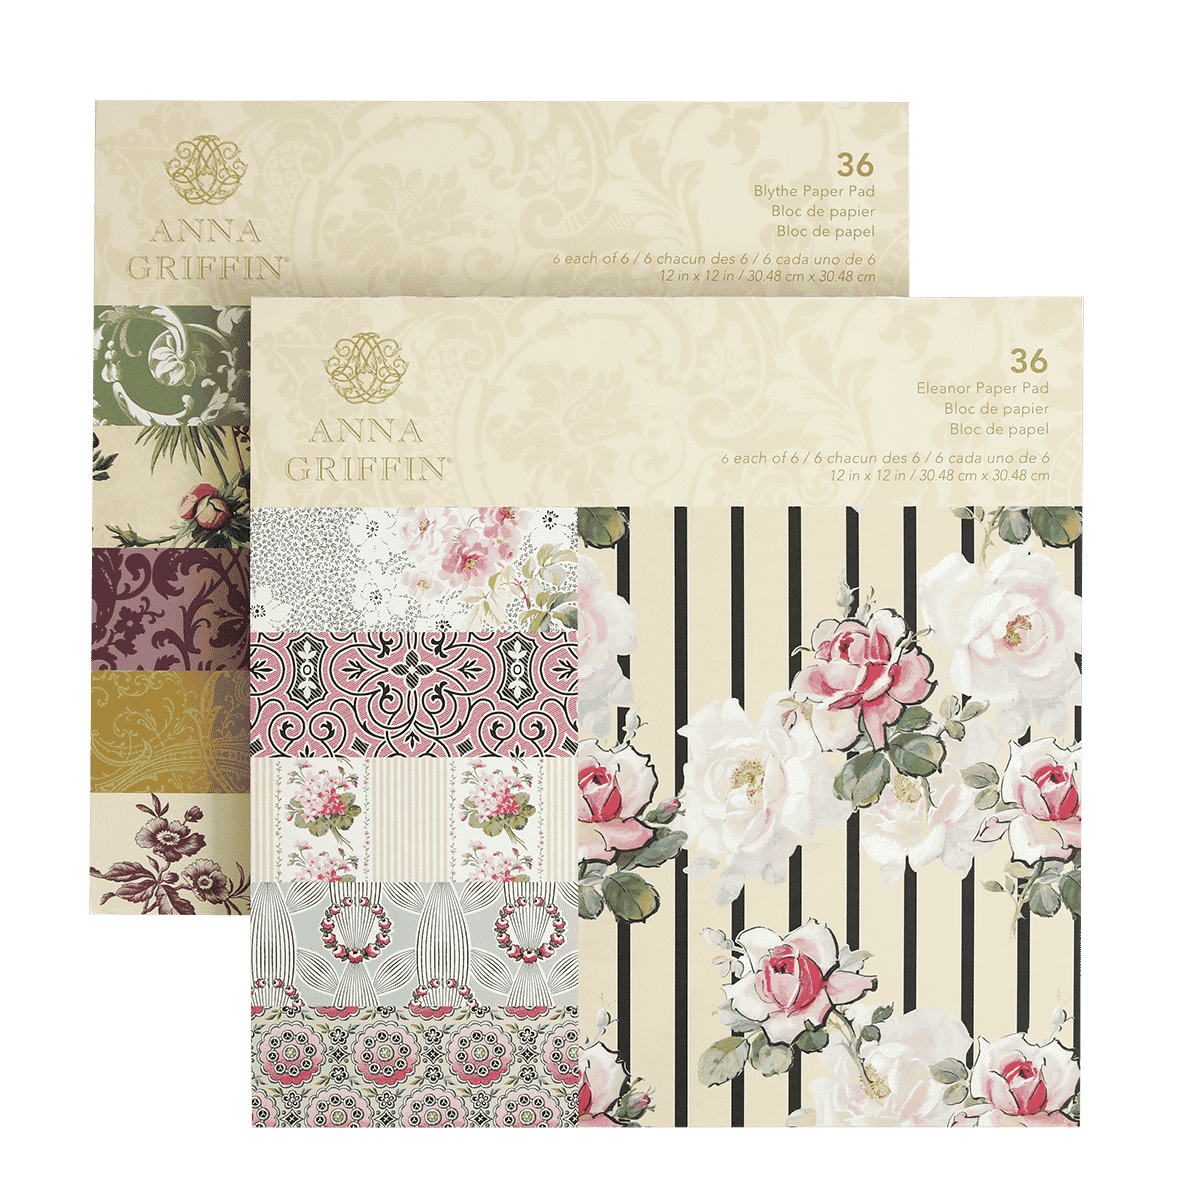 a variety of papers with flowers on them.